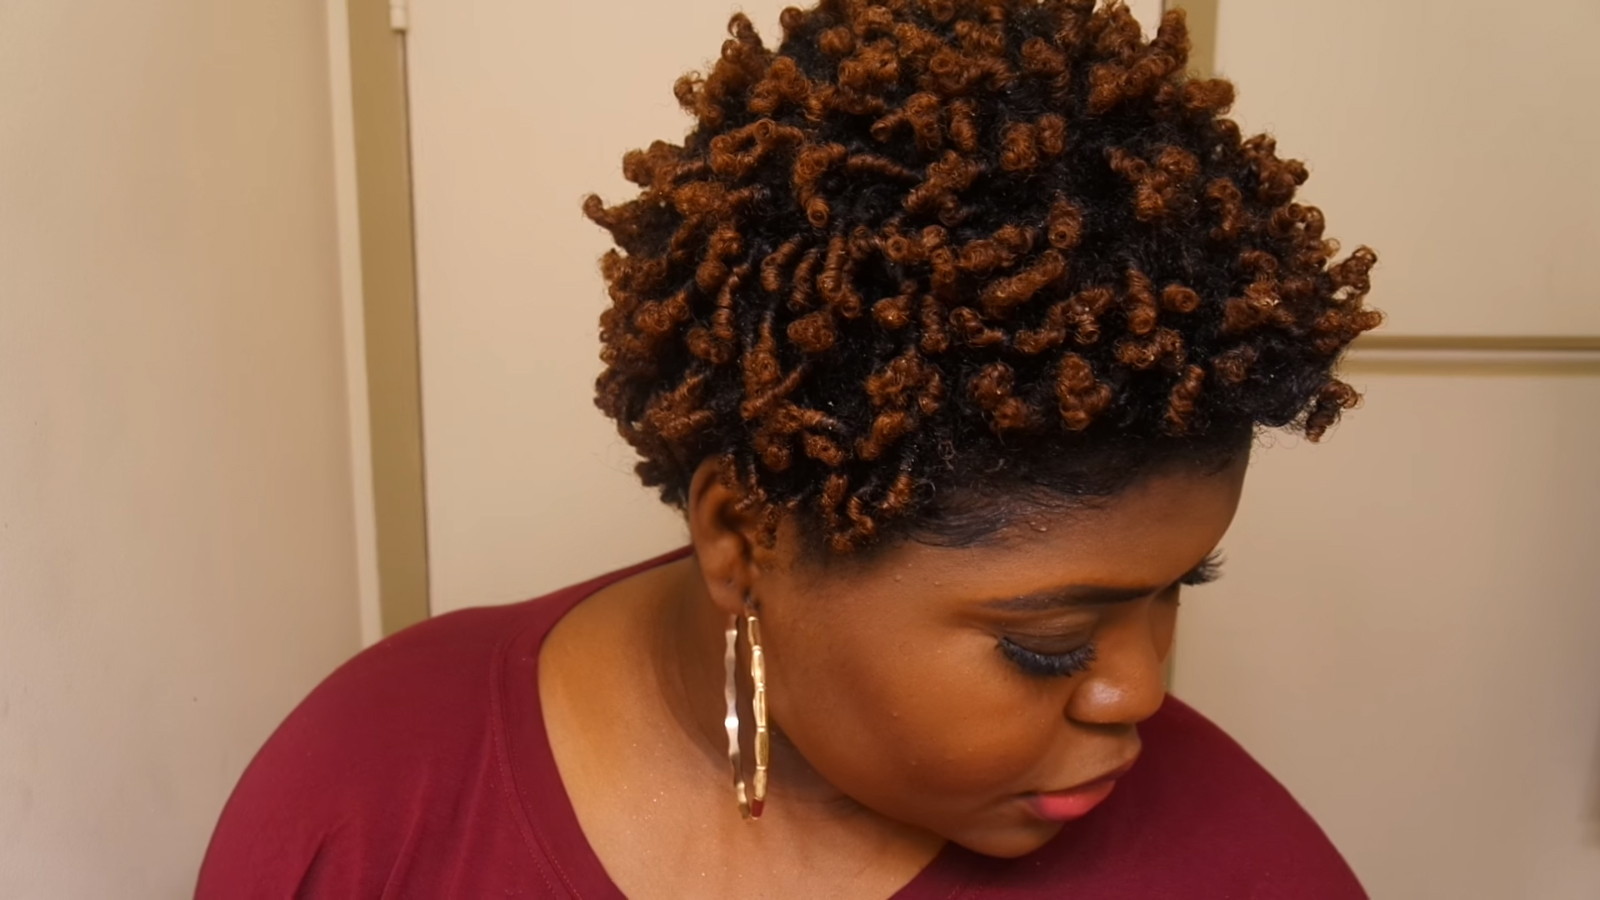 Super Defined Protective Hairstyles Using Finger Coils On 4C Natural Hair